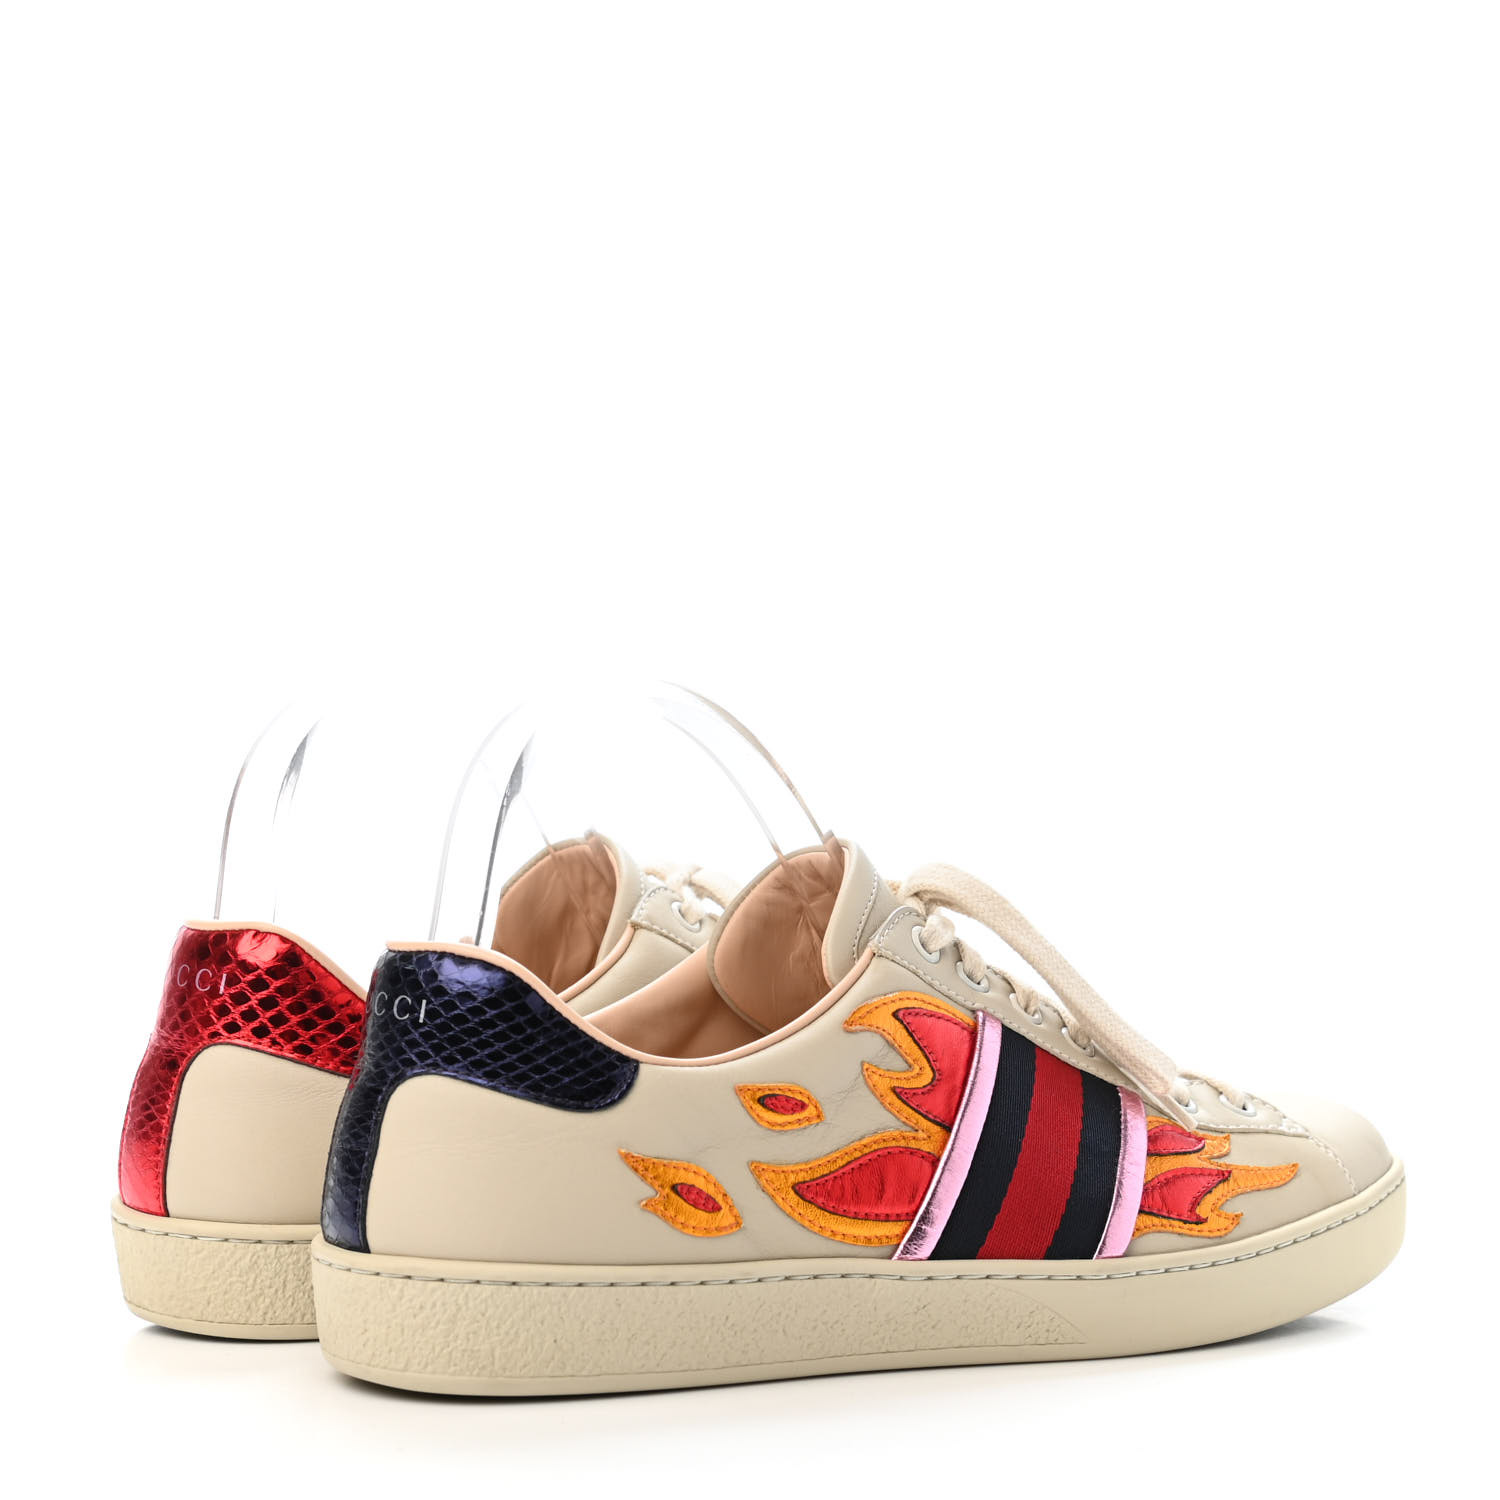 Løfte heroisk struktur GUCCI Calfskin Ayers Web Flames Embroidered Mens Ace Sneakers 8 Off White  815855 | FASHIONPHILE